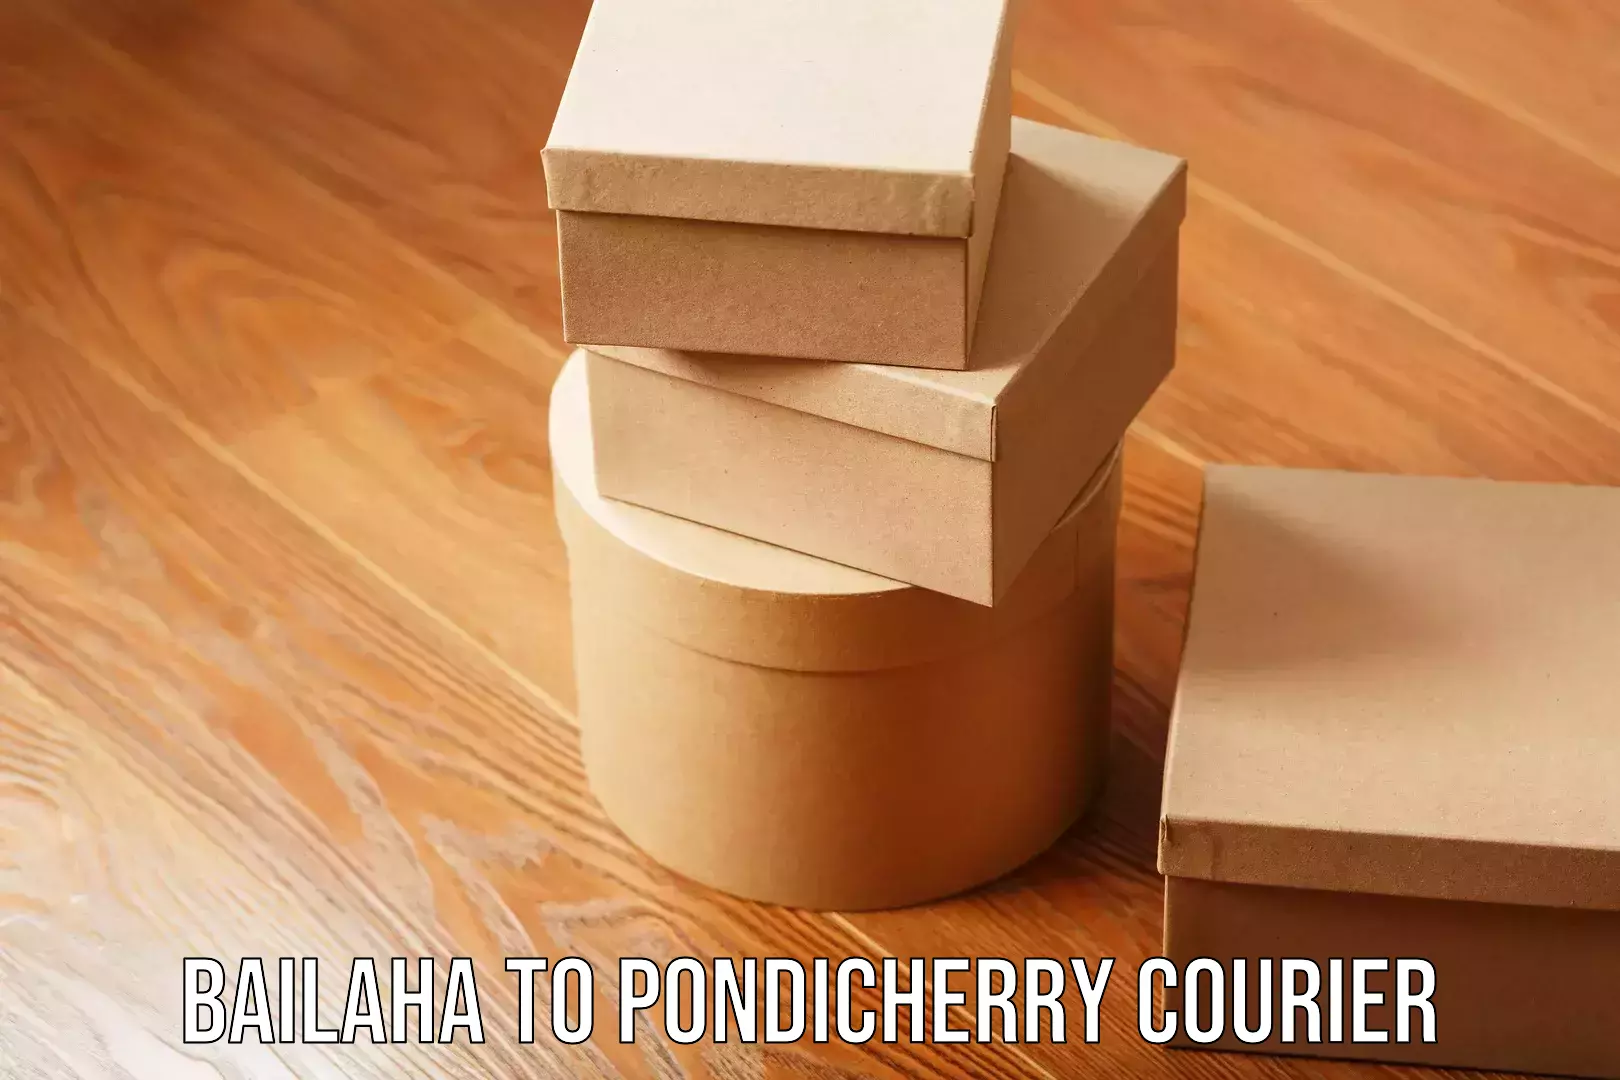 User-friendly delivery service Bailaha to Pondicherry